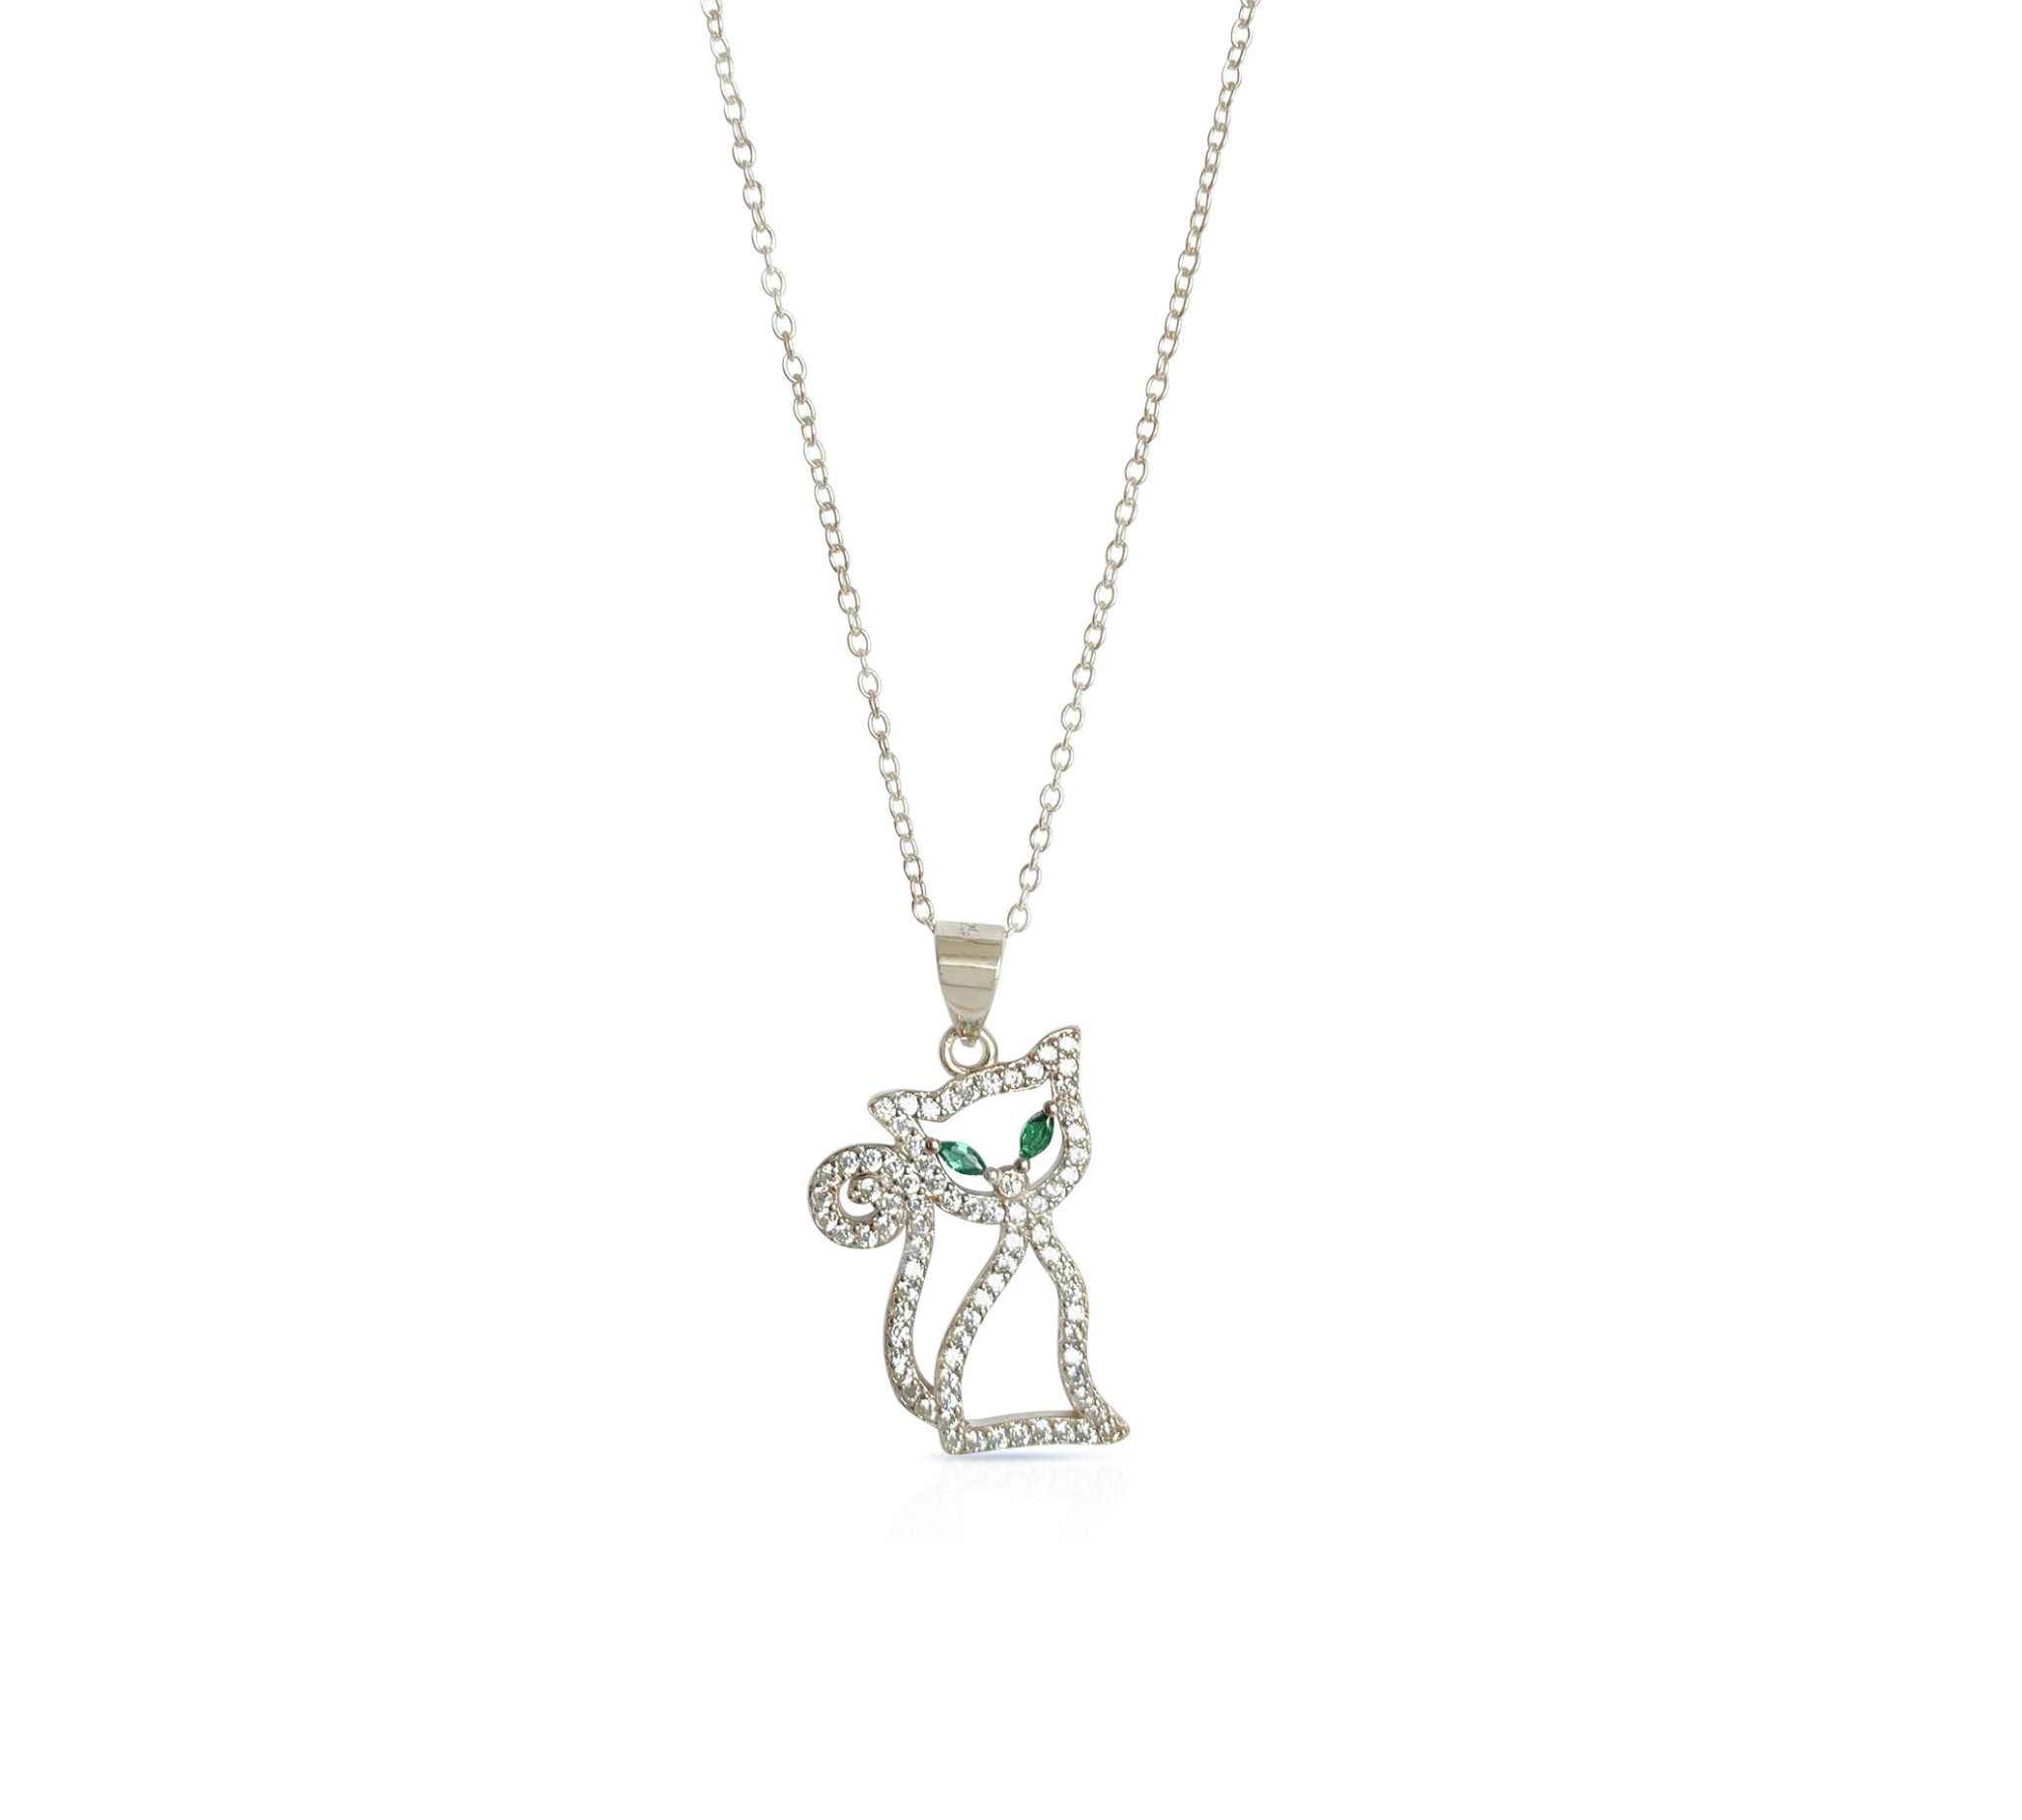 Fashionable cat pendant necklace, featuring bright zircons and captivating green eyes, a perfect accessory for feline enthusiasts.